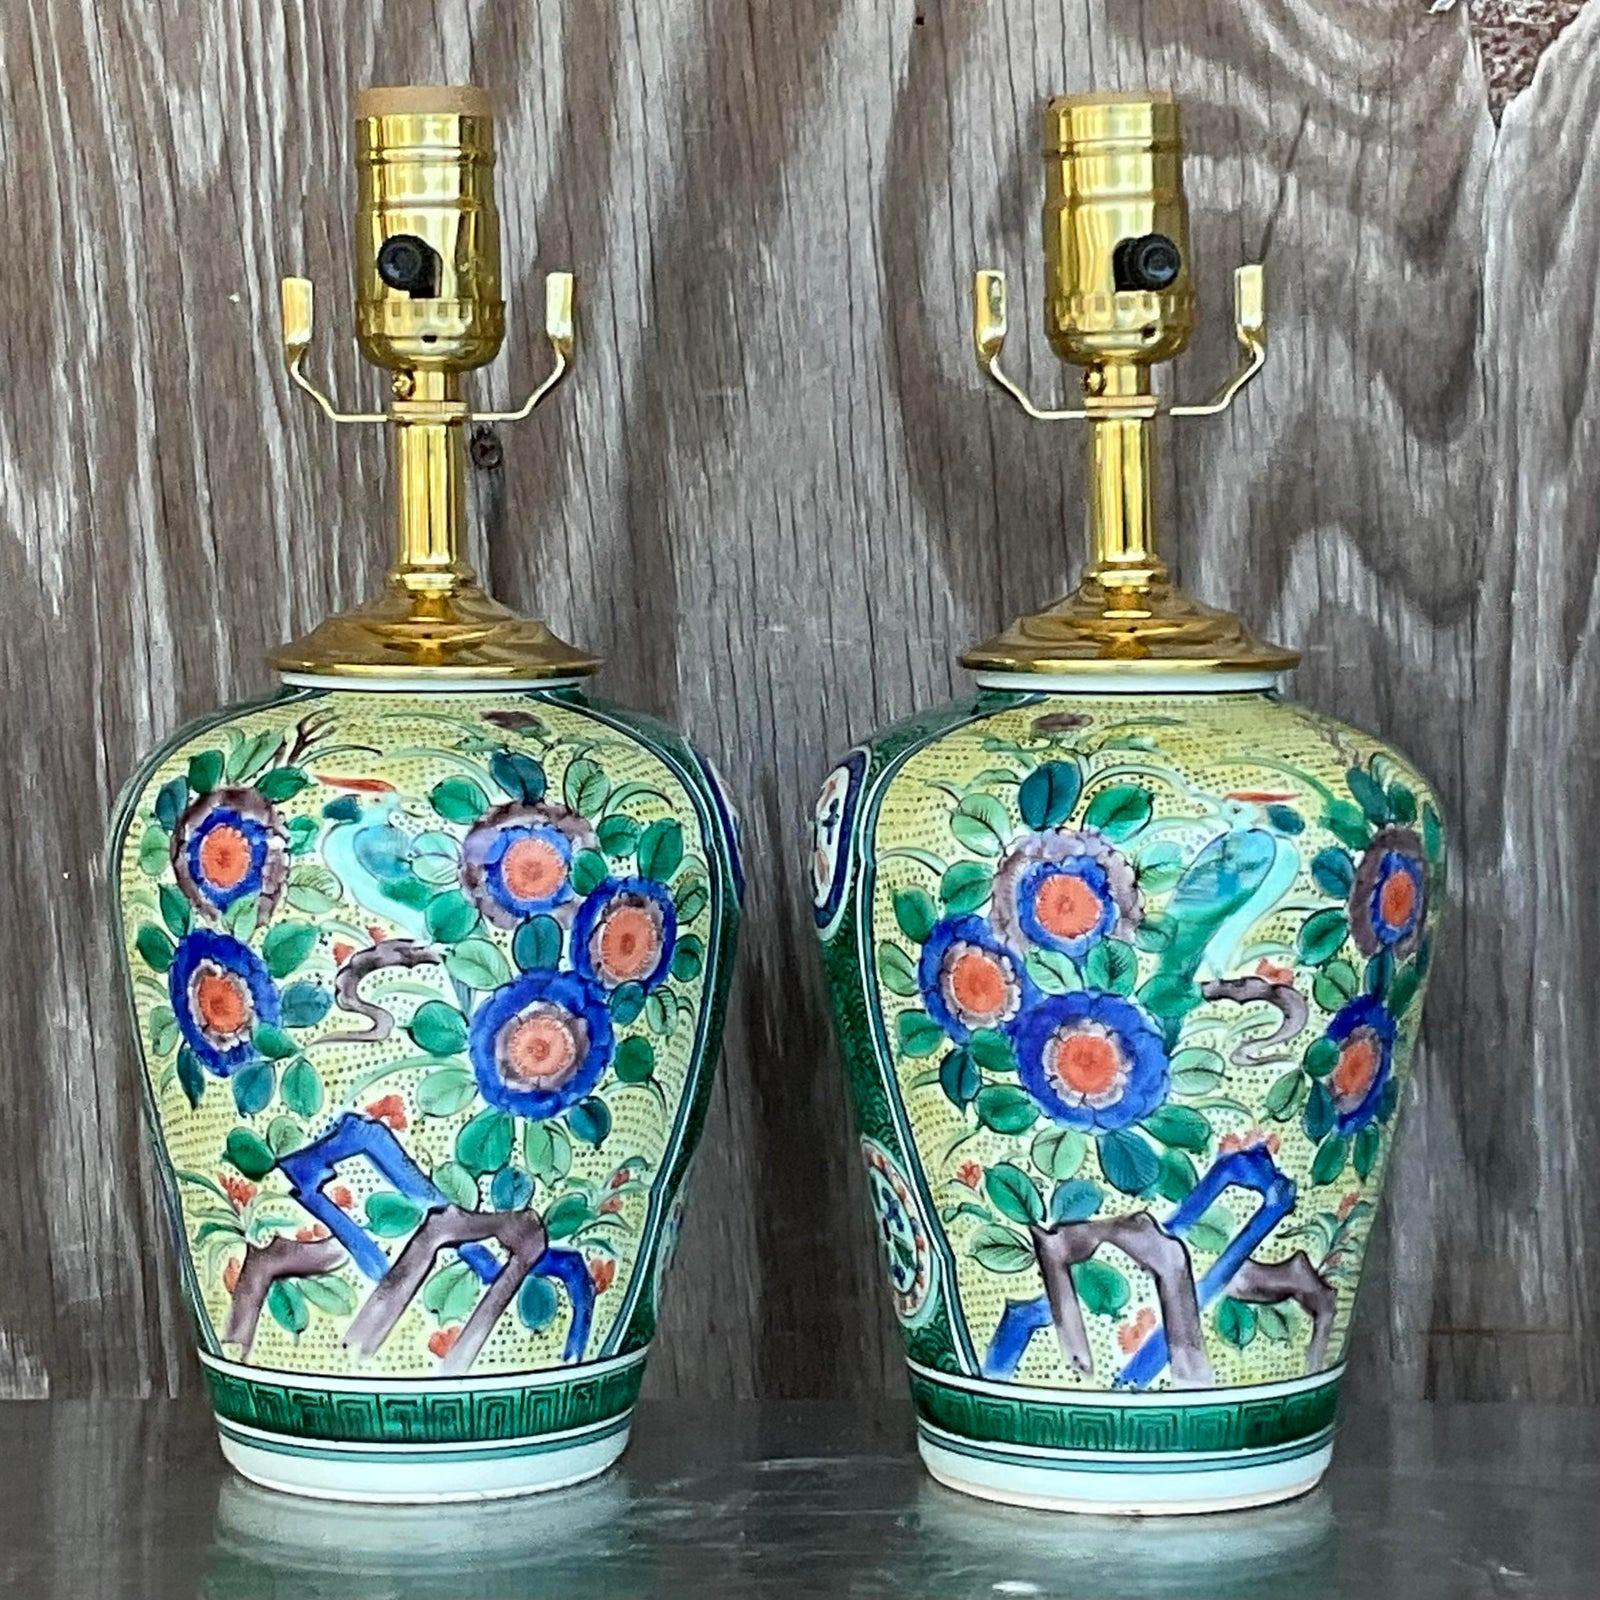 Vintage Asian Glazed Ceramic Floral Table Lamps - a Pair For Sale 2